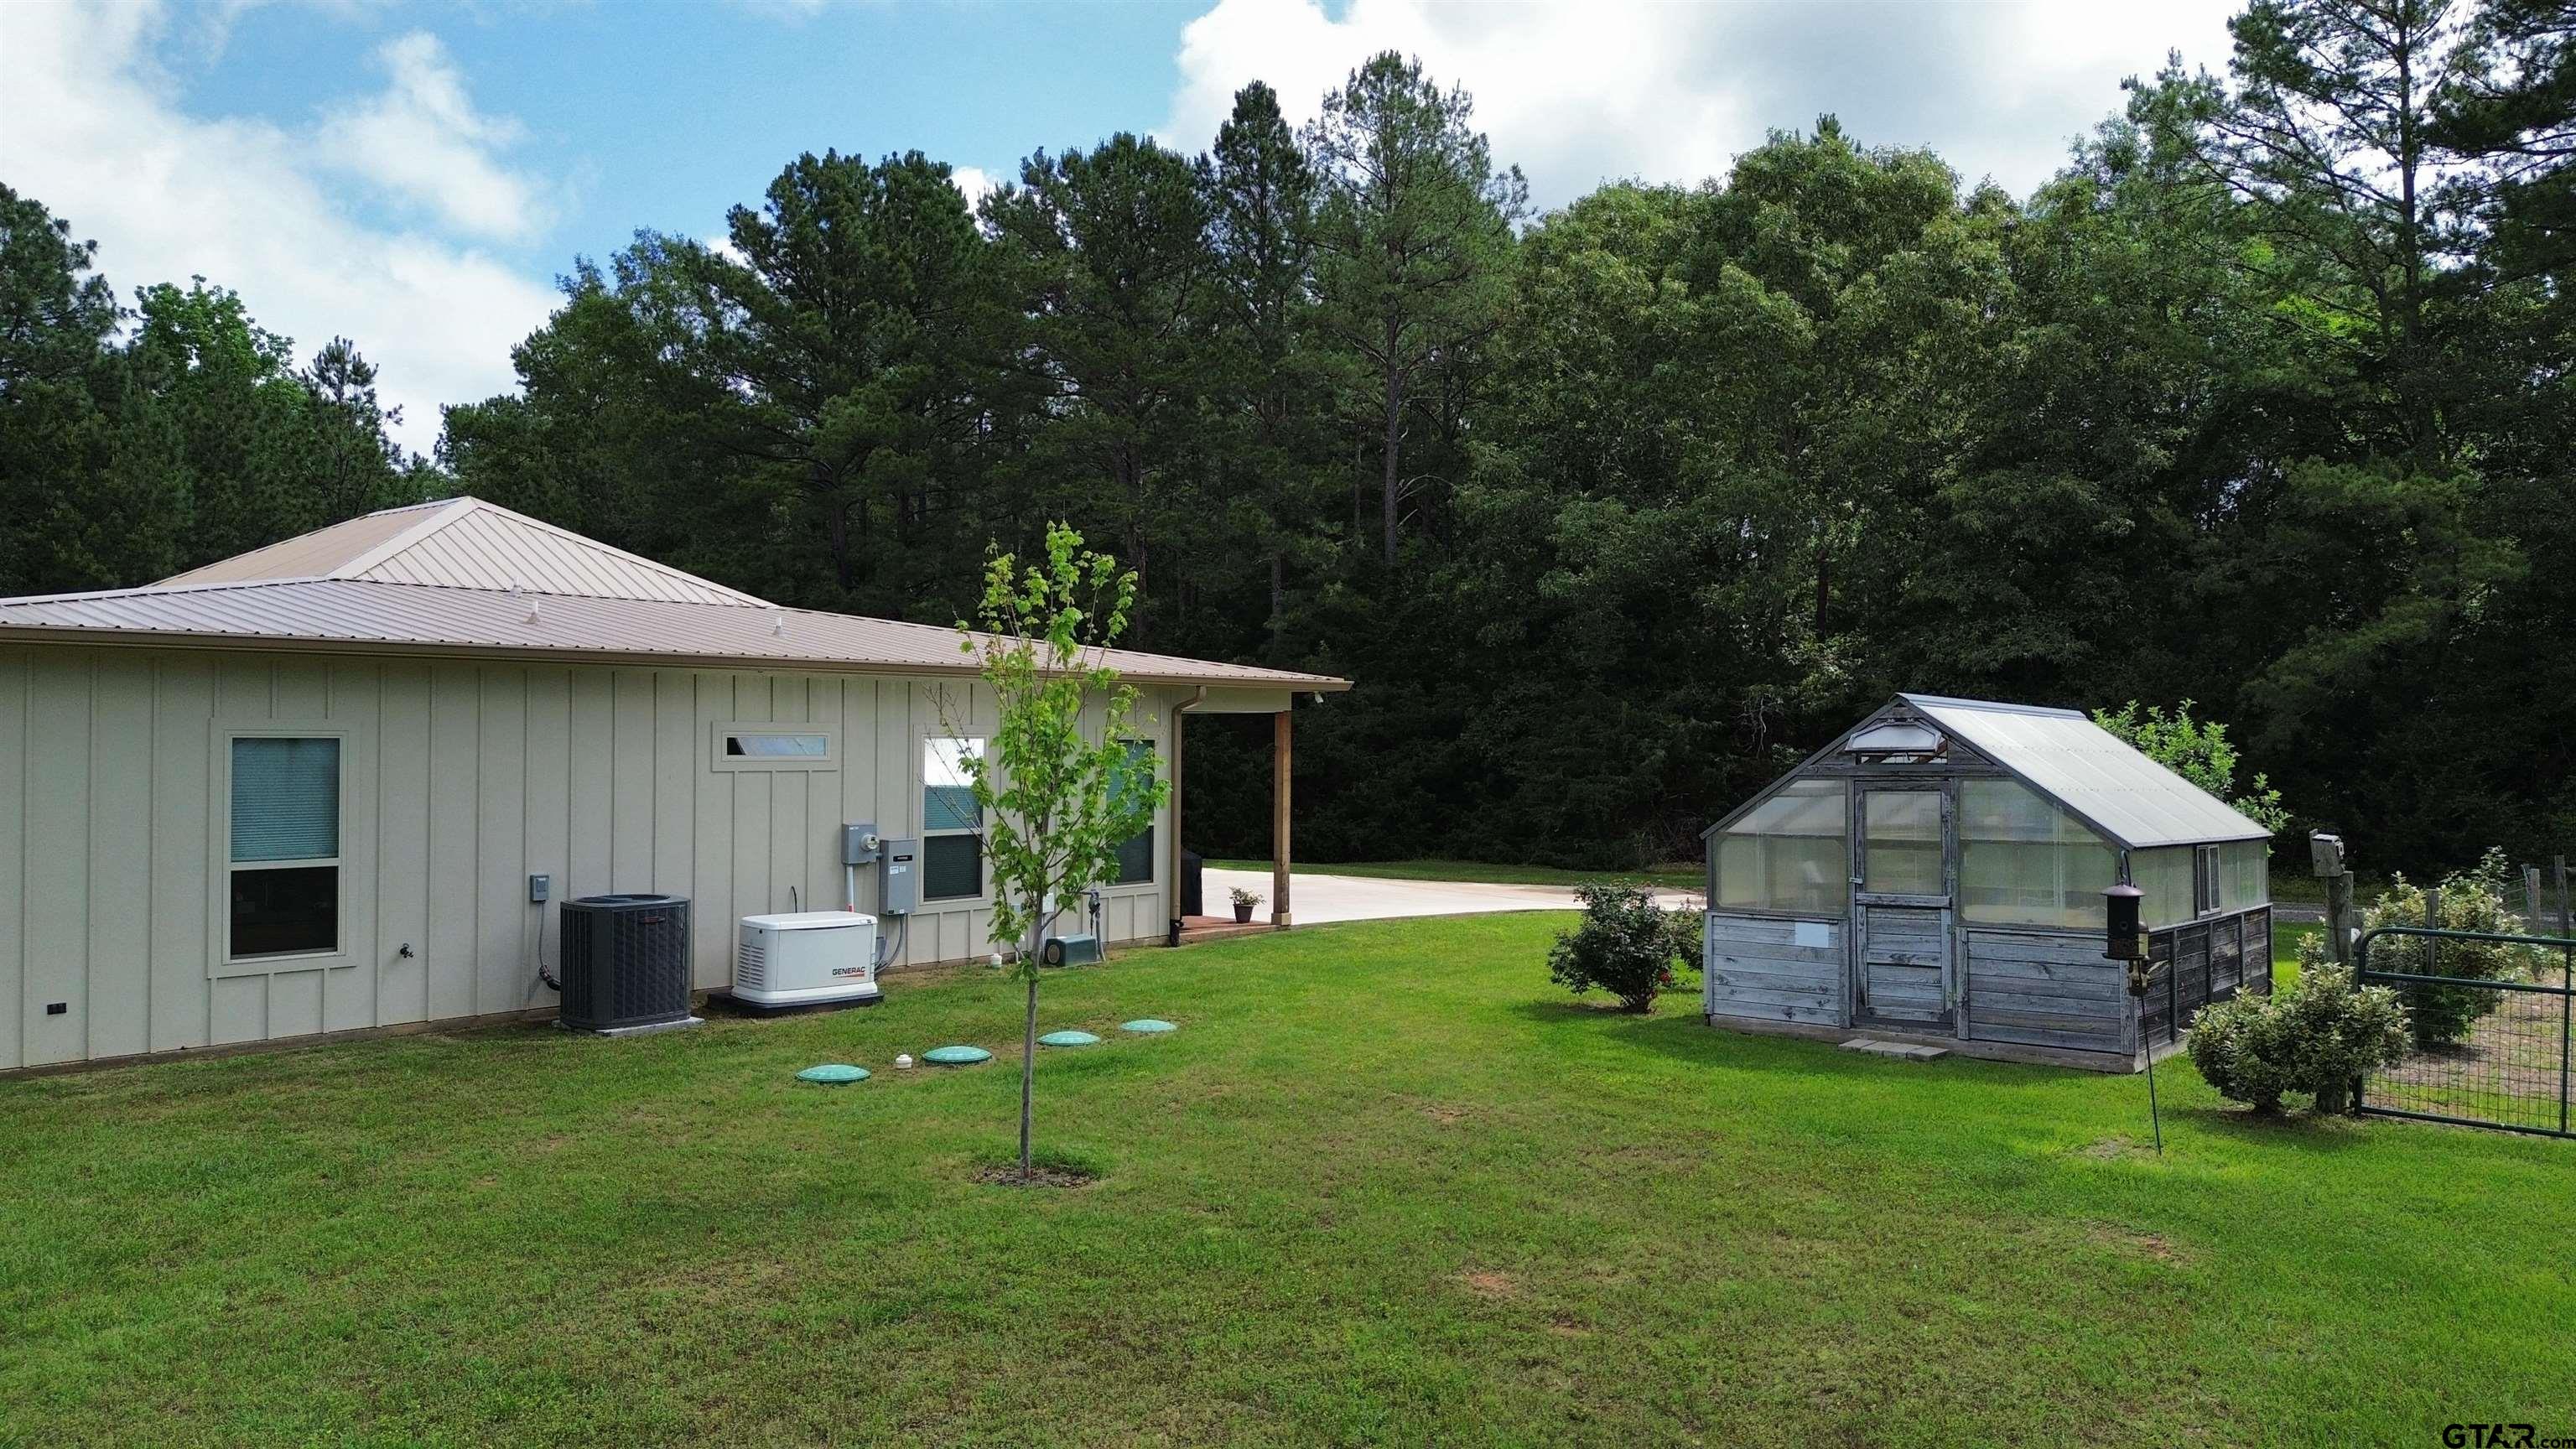 1480 county road 3811, Troup, Texas 75789, 3 Bedrooms Bedrooms, ,3 BathroomsBathrooms,Single Family Detached,For Sale,county road 3811,24000671